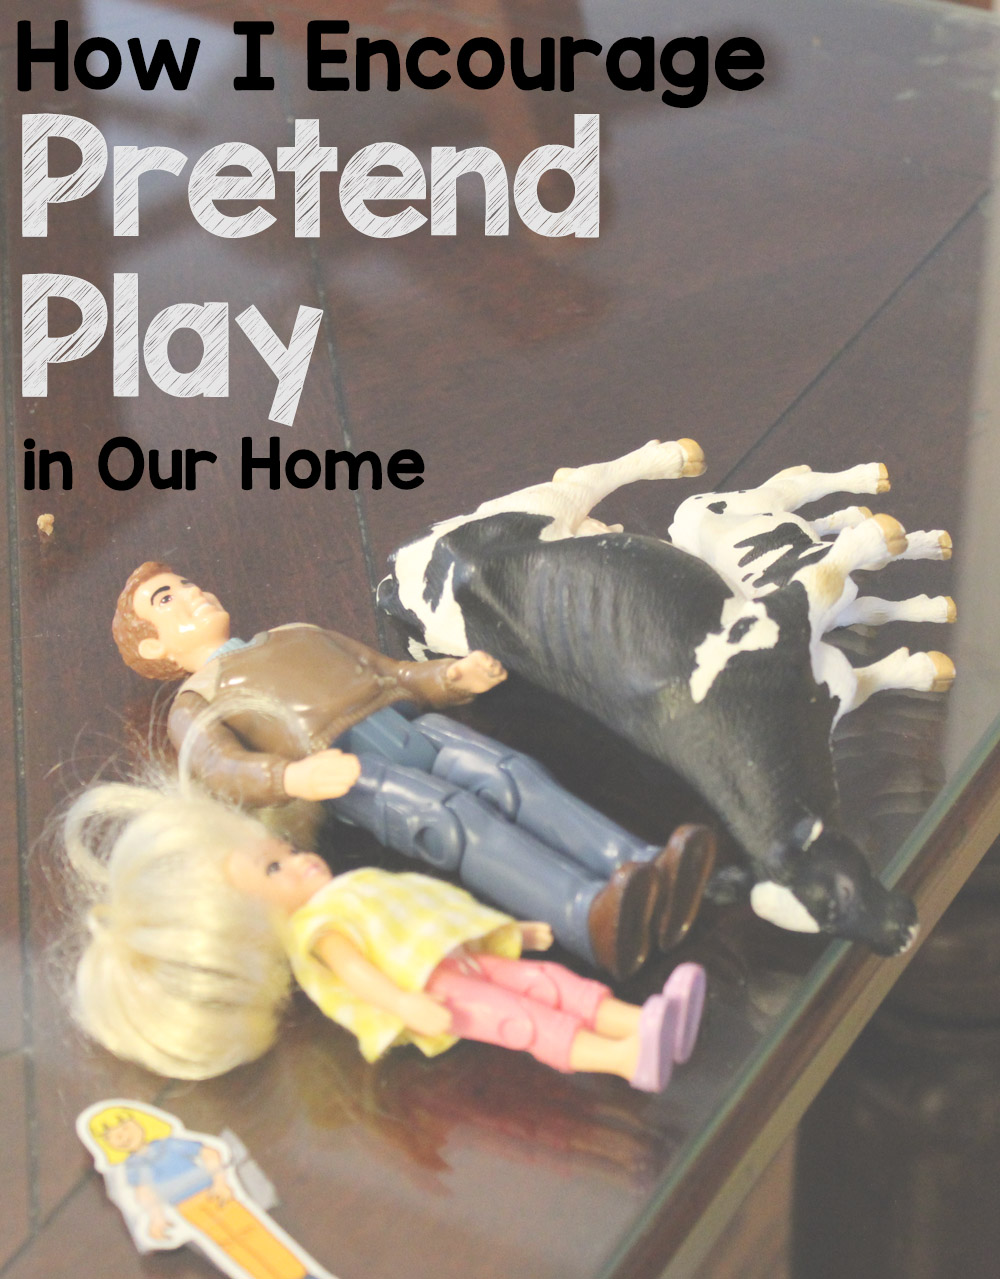 How I Encourage Pretend Play in Our Home